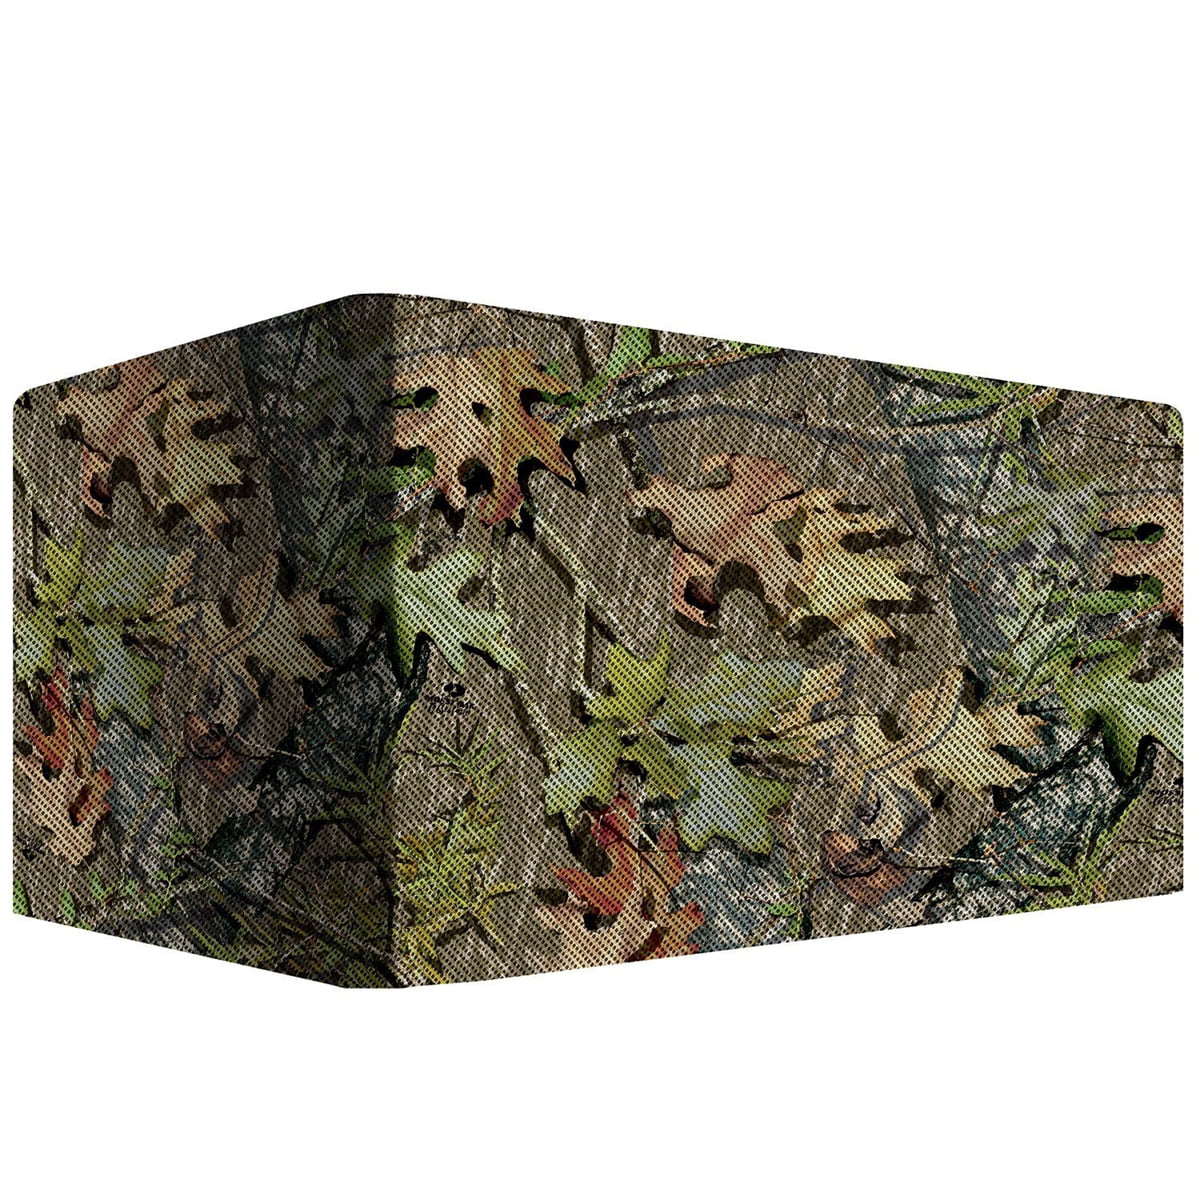 Mossy Oak Omnitex 3d Camo Blind Fabric 12ft X 56 Inches High 25762A for sale online 